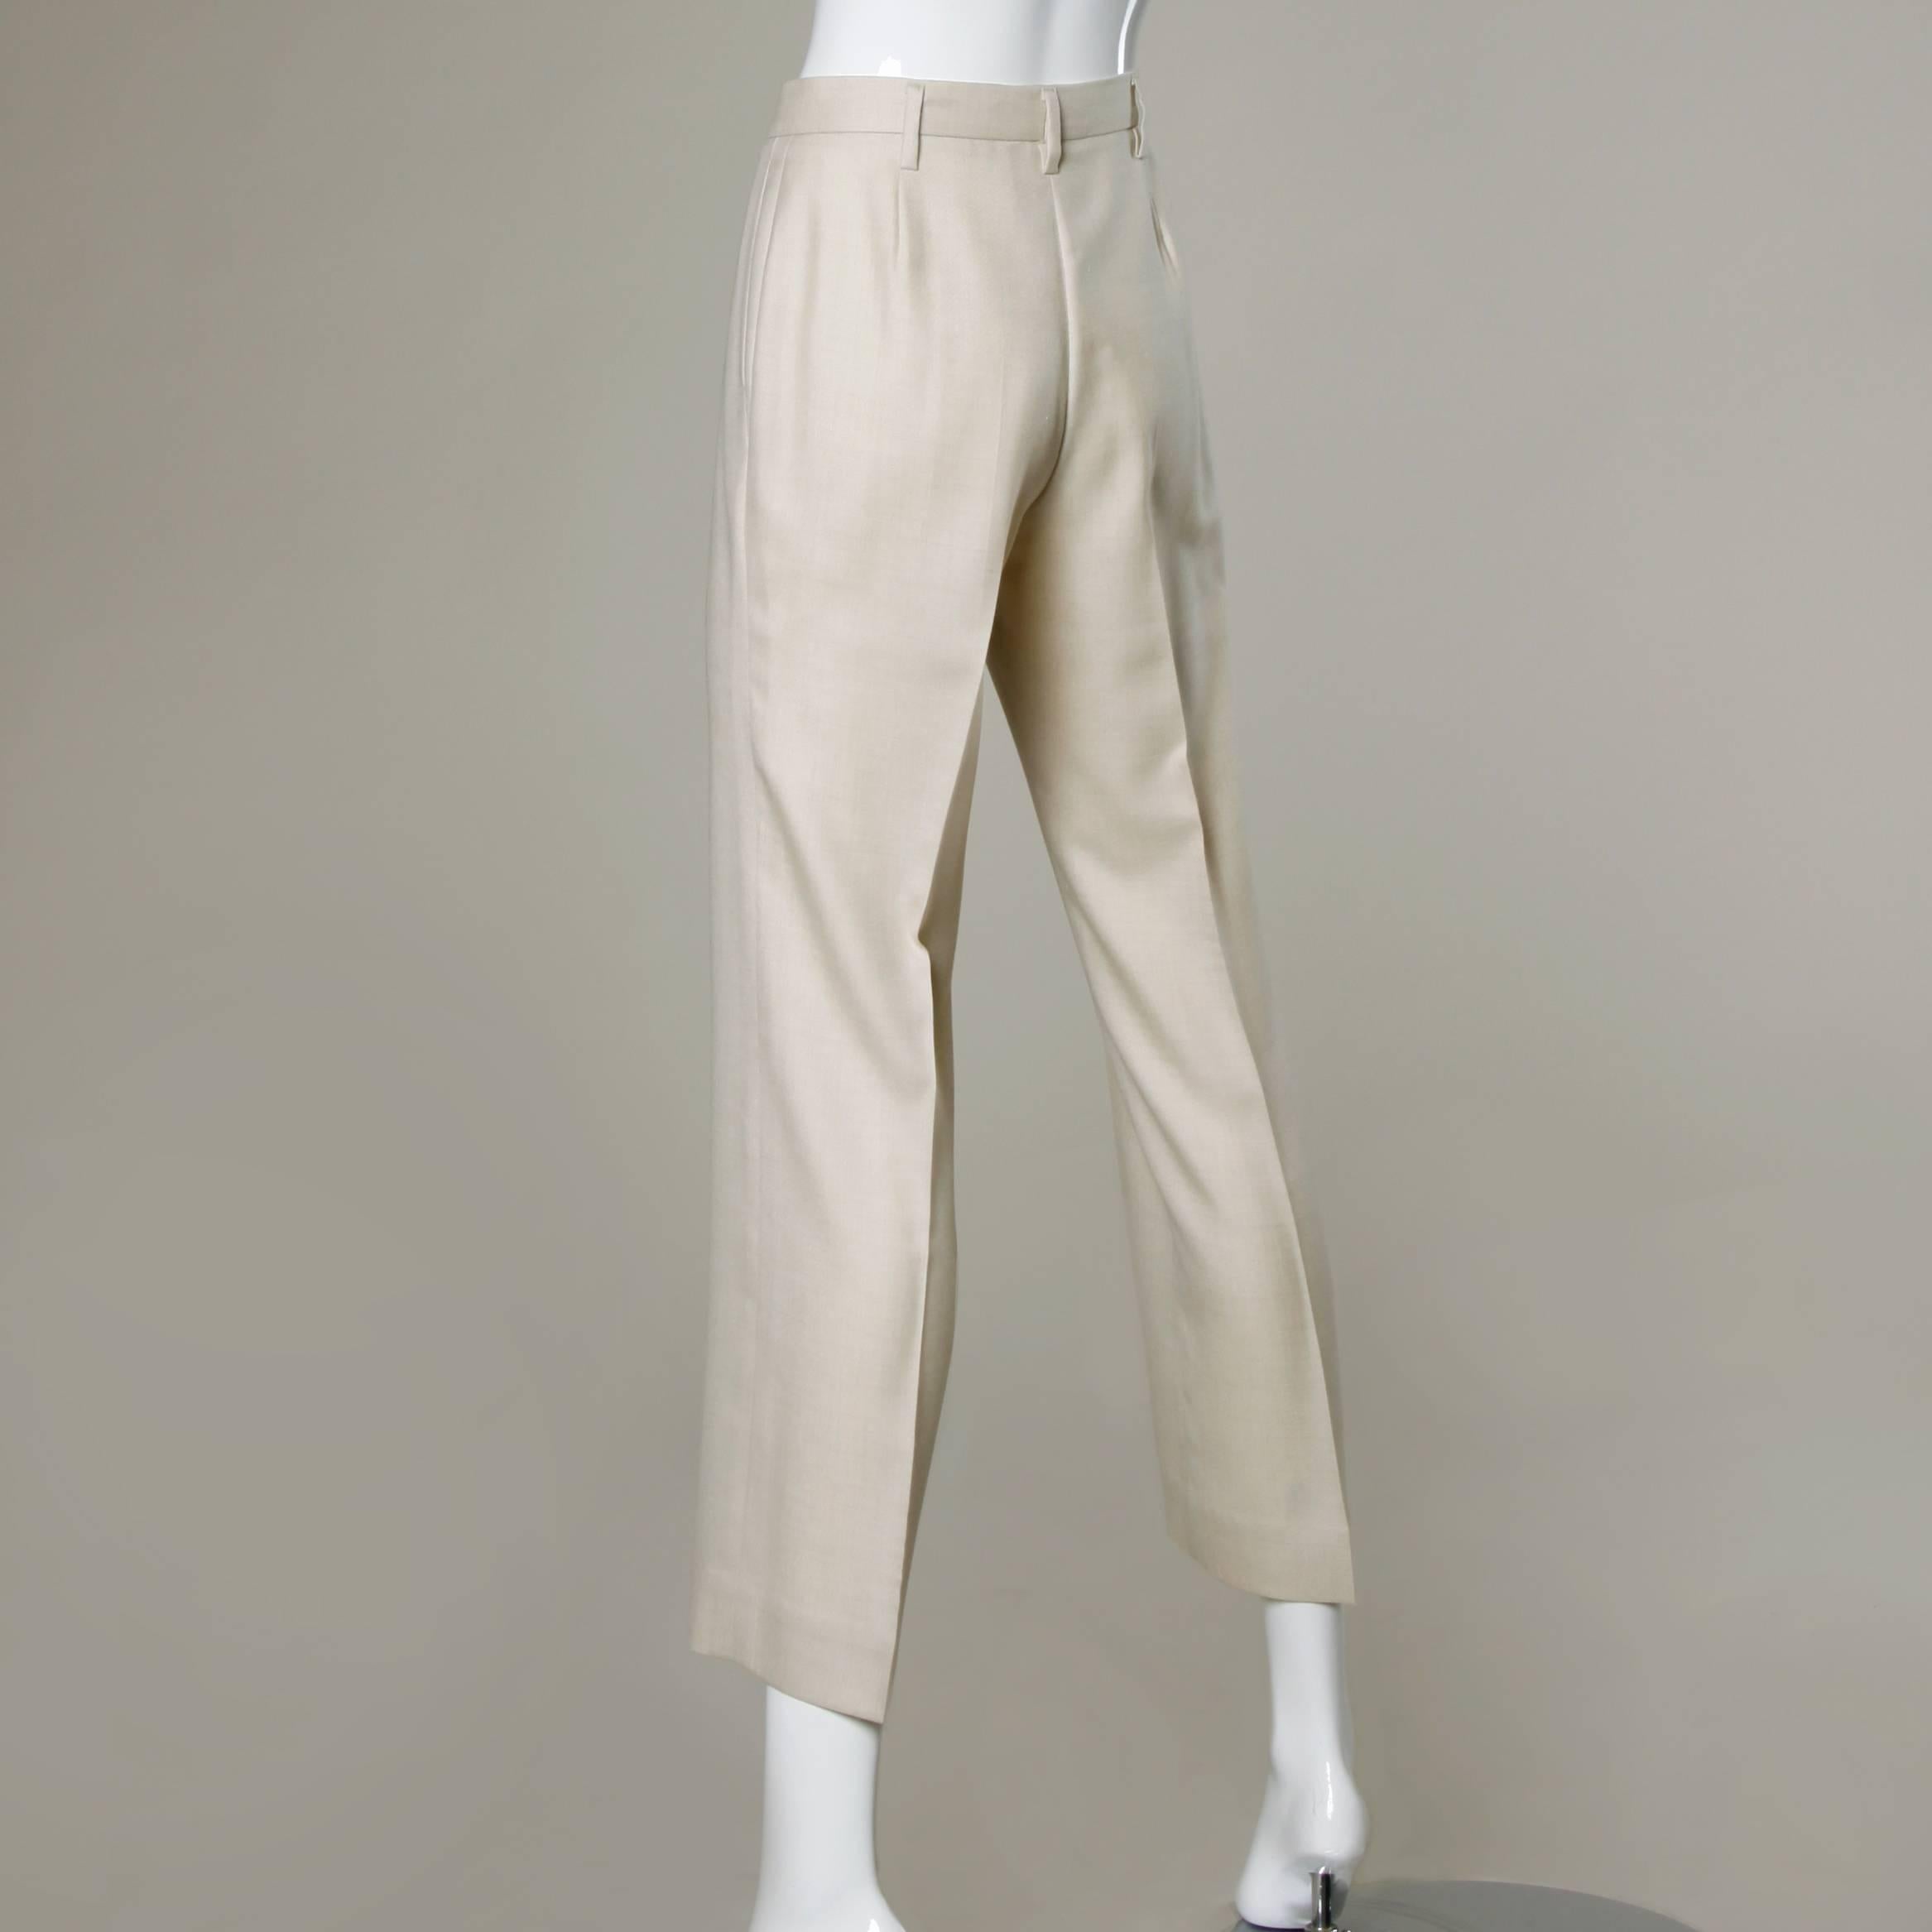 Details:

Unlined
Side Pockets
Front Zip and Hook Closure
Marked Size: 34
Color: Off White
Fabric: Not Marked/ Feels like Wool Blend
Label: Jill Sander

Measurements:

Waist: 28